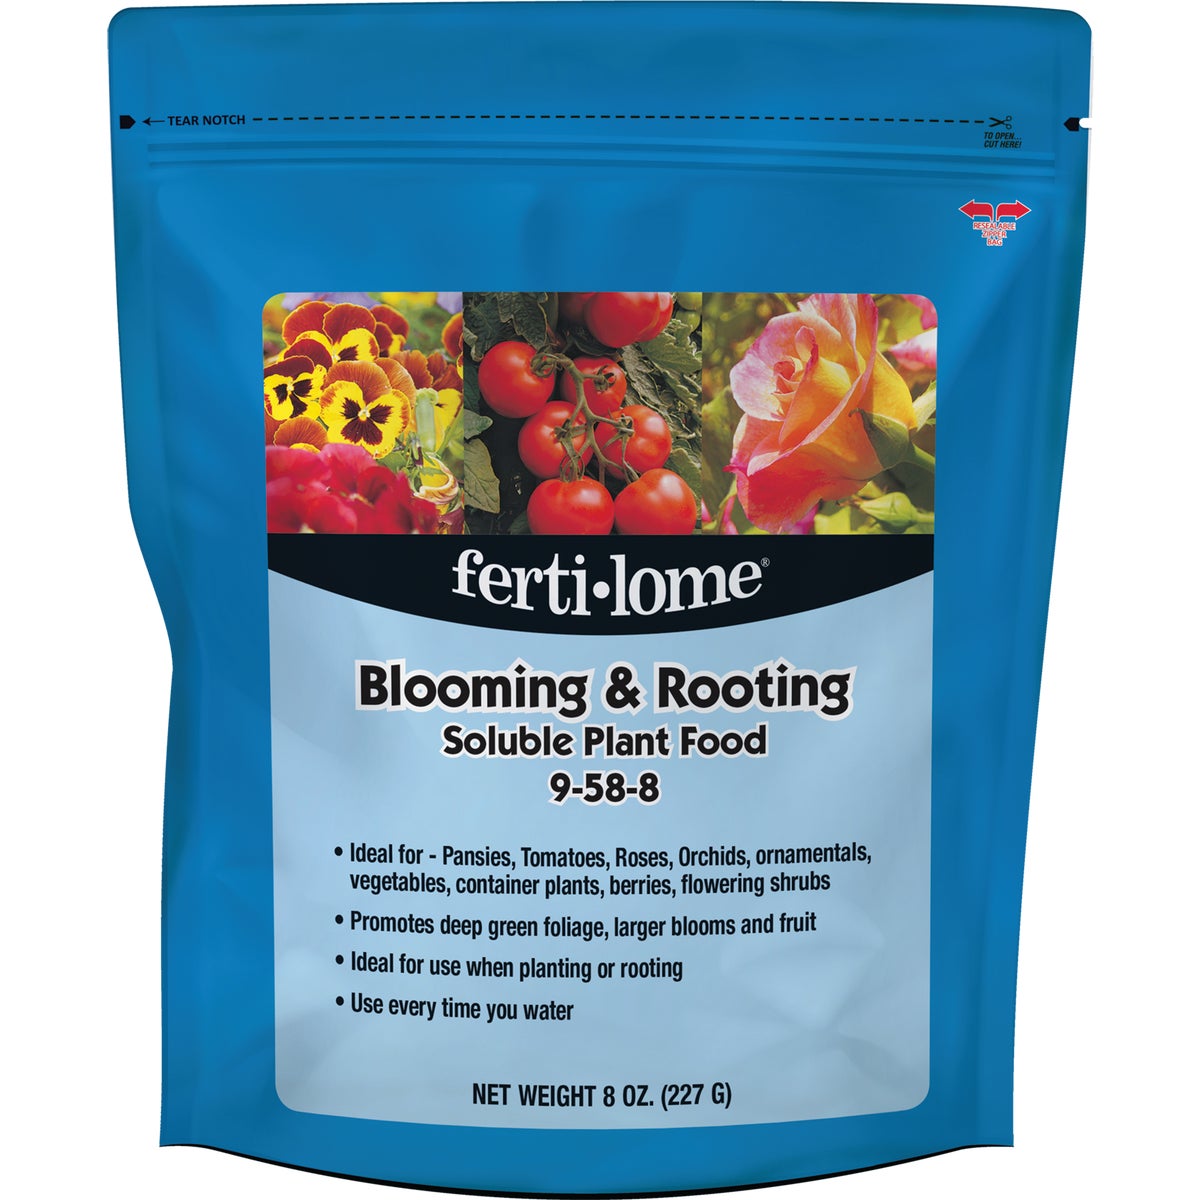 Ferti-lome 8 Oz. 9-58-8 Blooming & Rooting Soluble Dry Plant Food